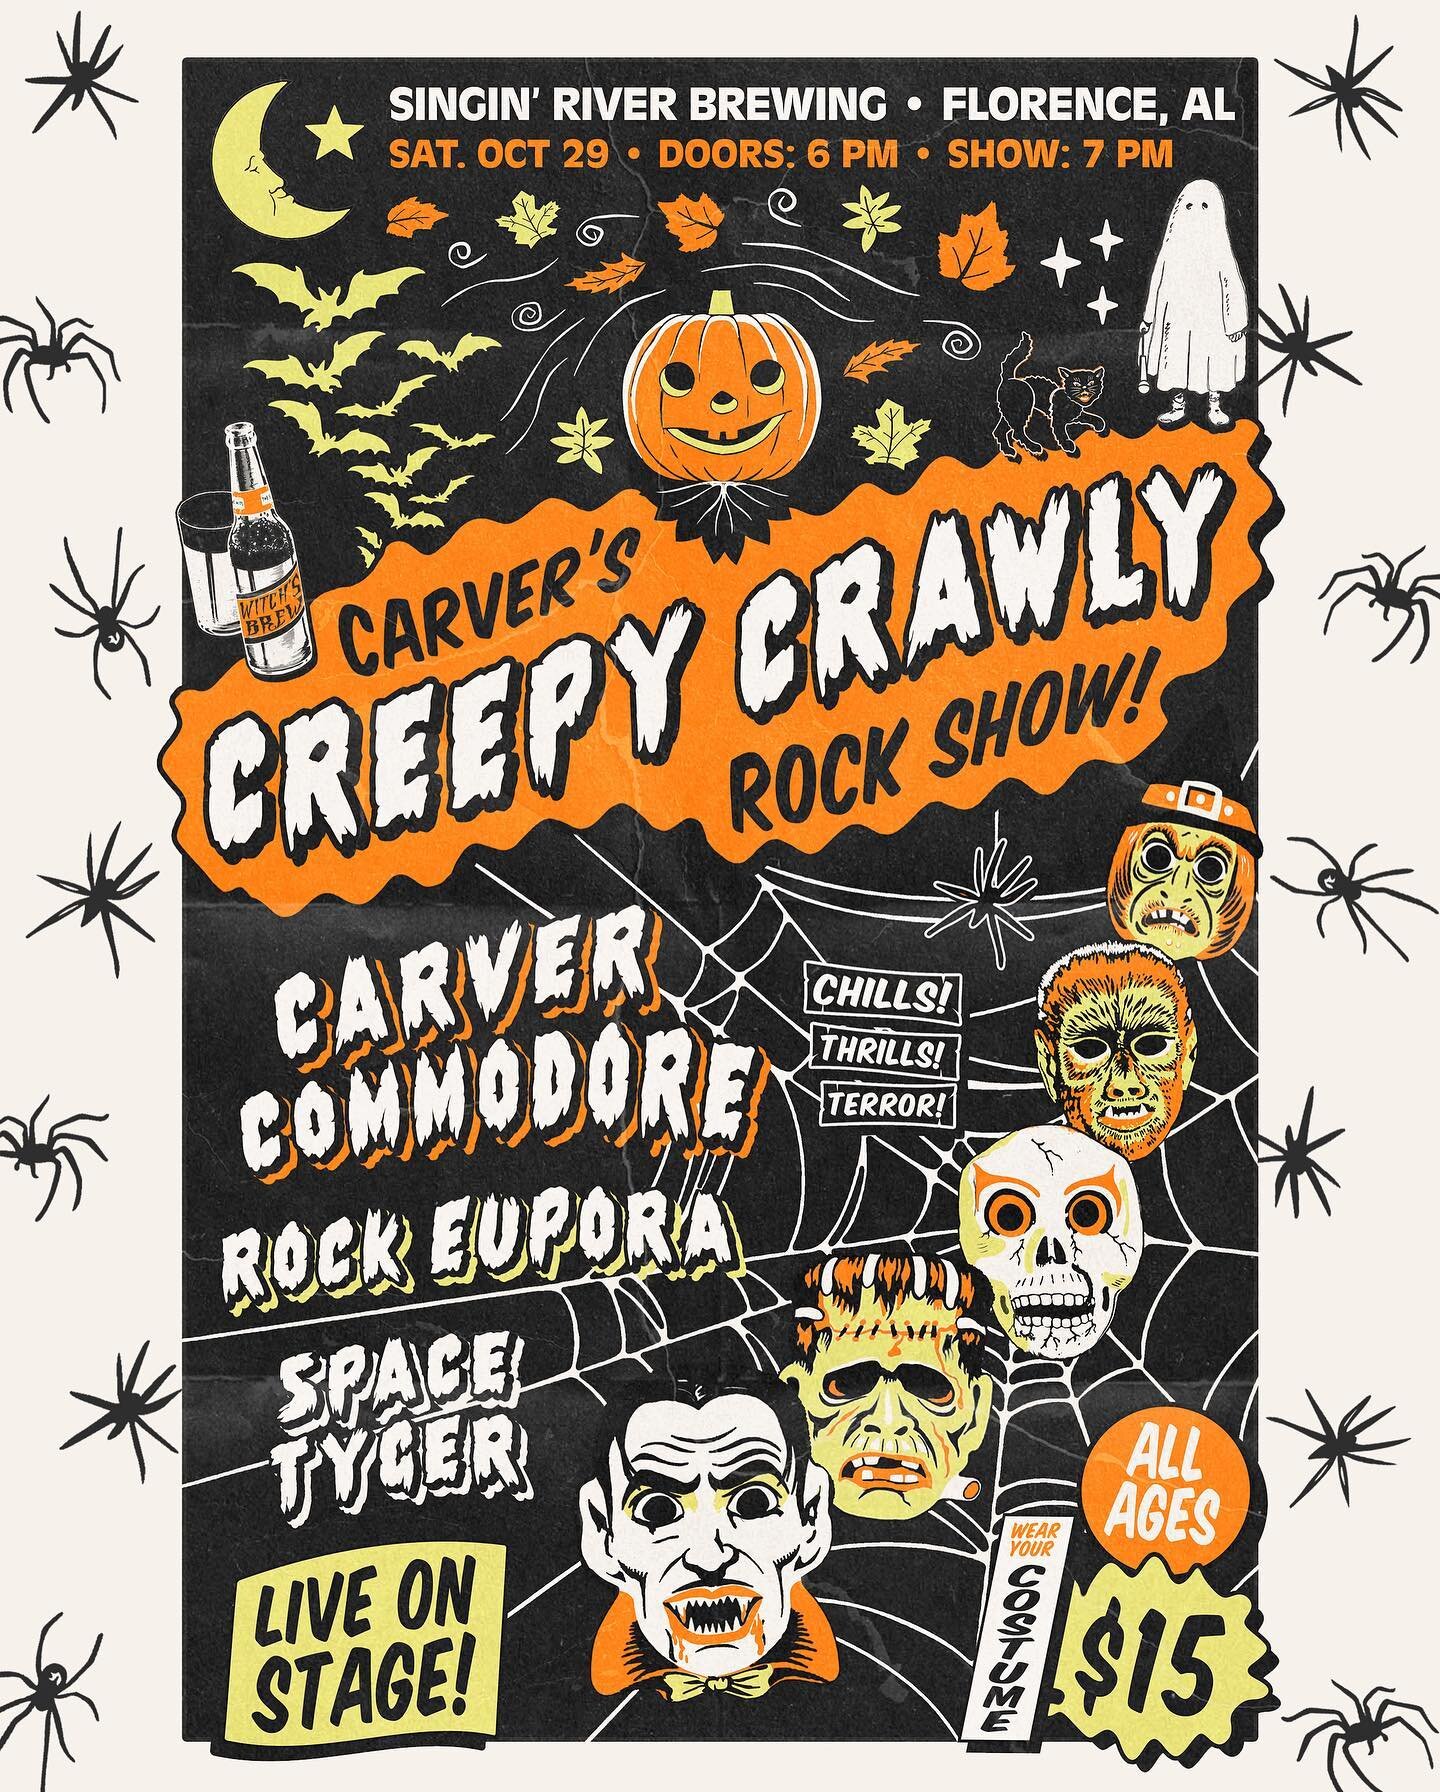 READY FOR THE BEST HALLOWEEN PARTY OF ALL TIME???
👻🍁 🎃 🍂 💀
10.29 at @singinriver w/ @rockeupora &amp; @spacetyger in Florence, AL. Tickets on sale now.